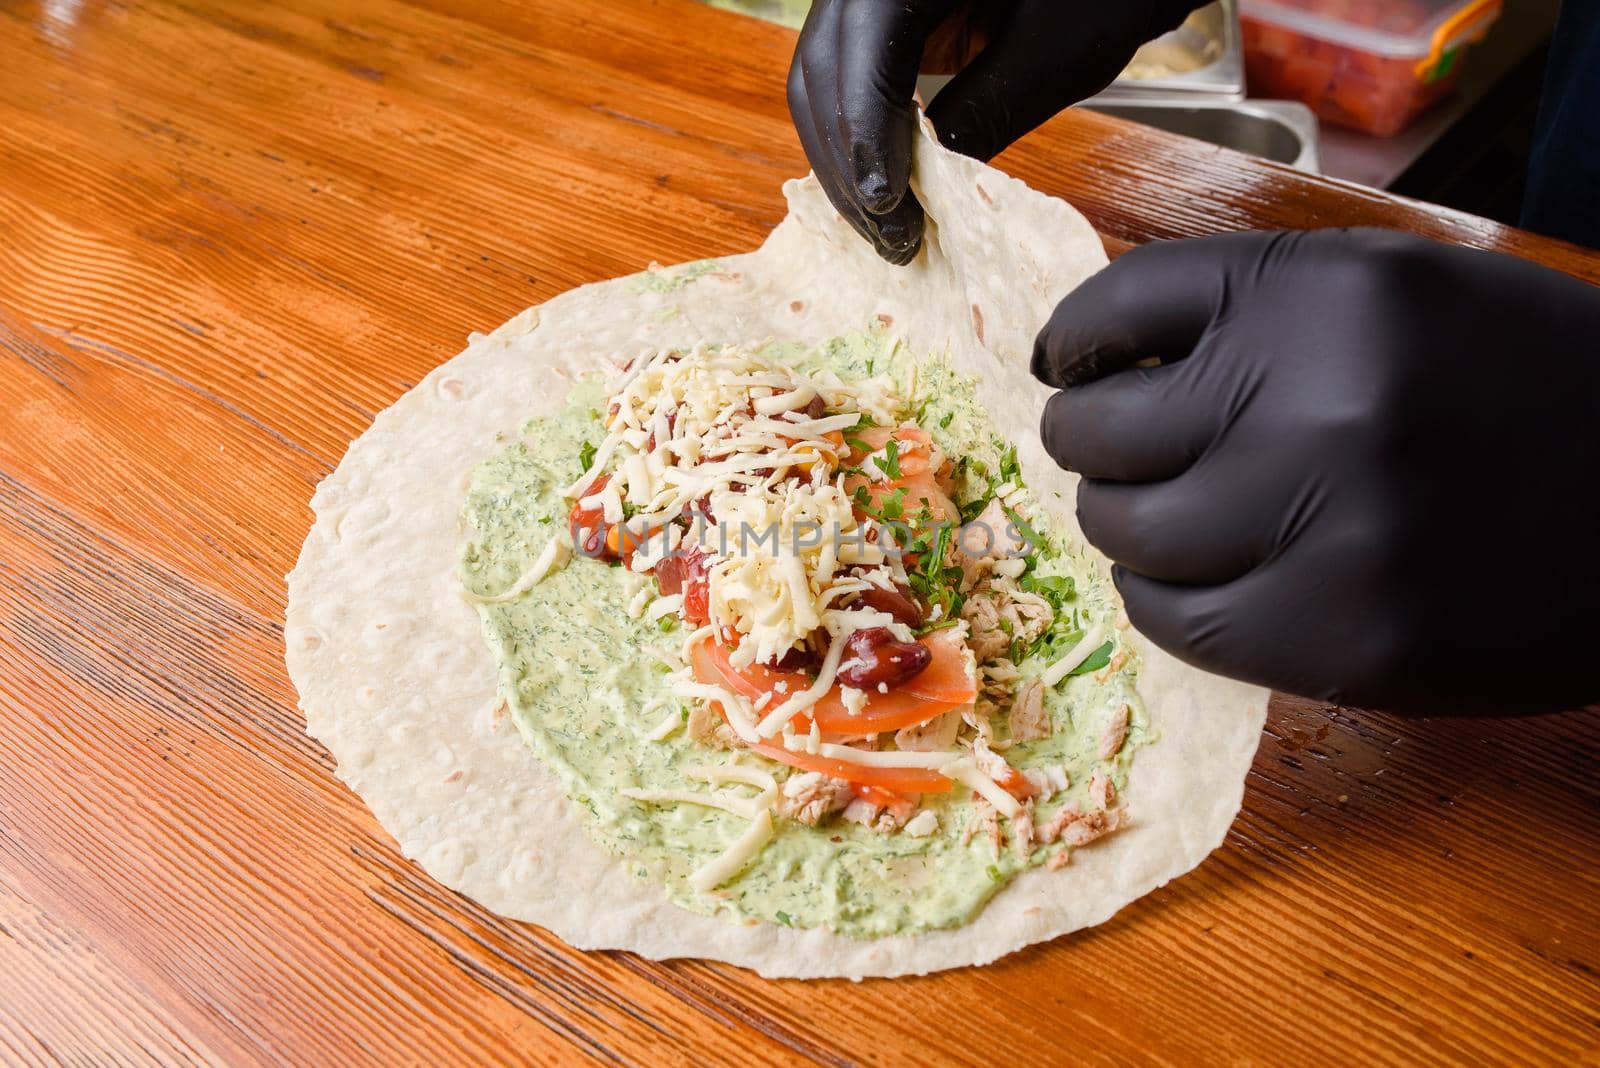 Burrito making process. The chef wraps stuffed pita on a wooden table. Mexican dish by Rabizo